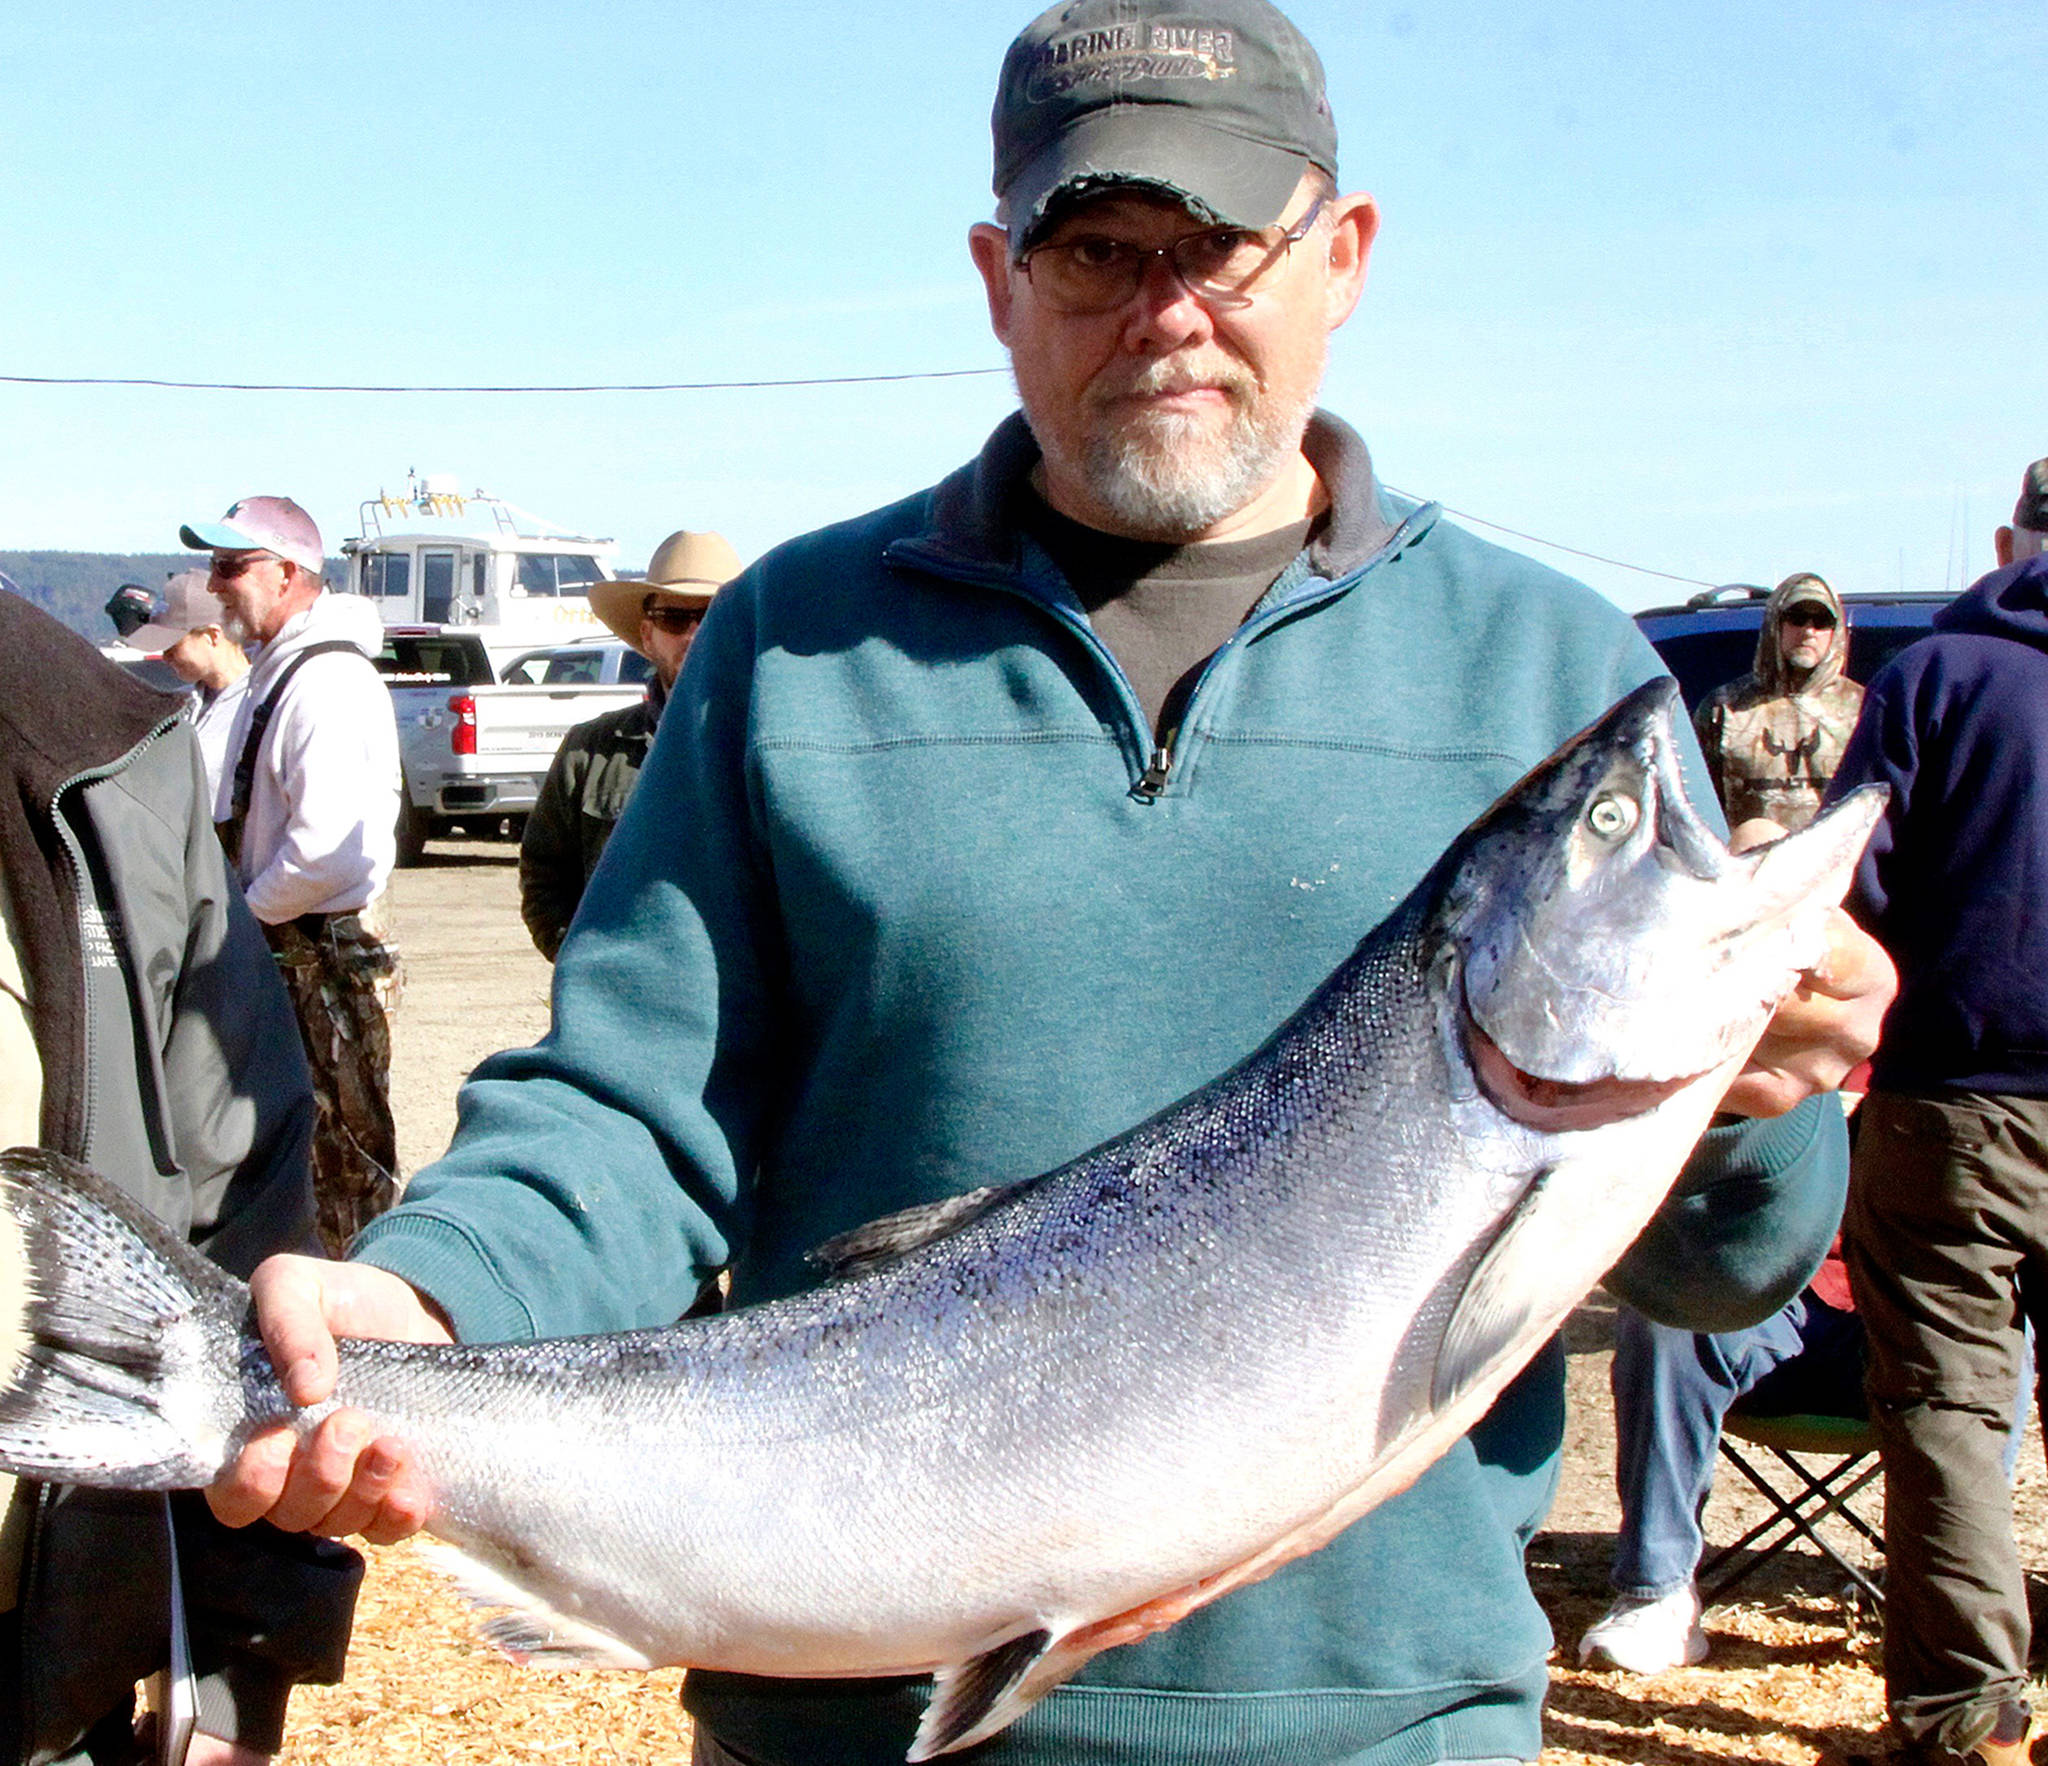 FISHING DERBY: 19.35-pound salmon wins by a mile